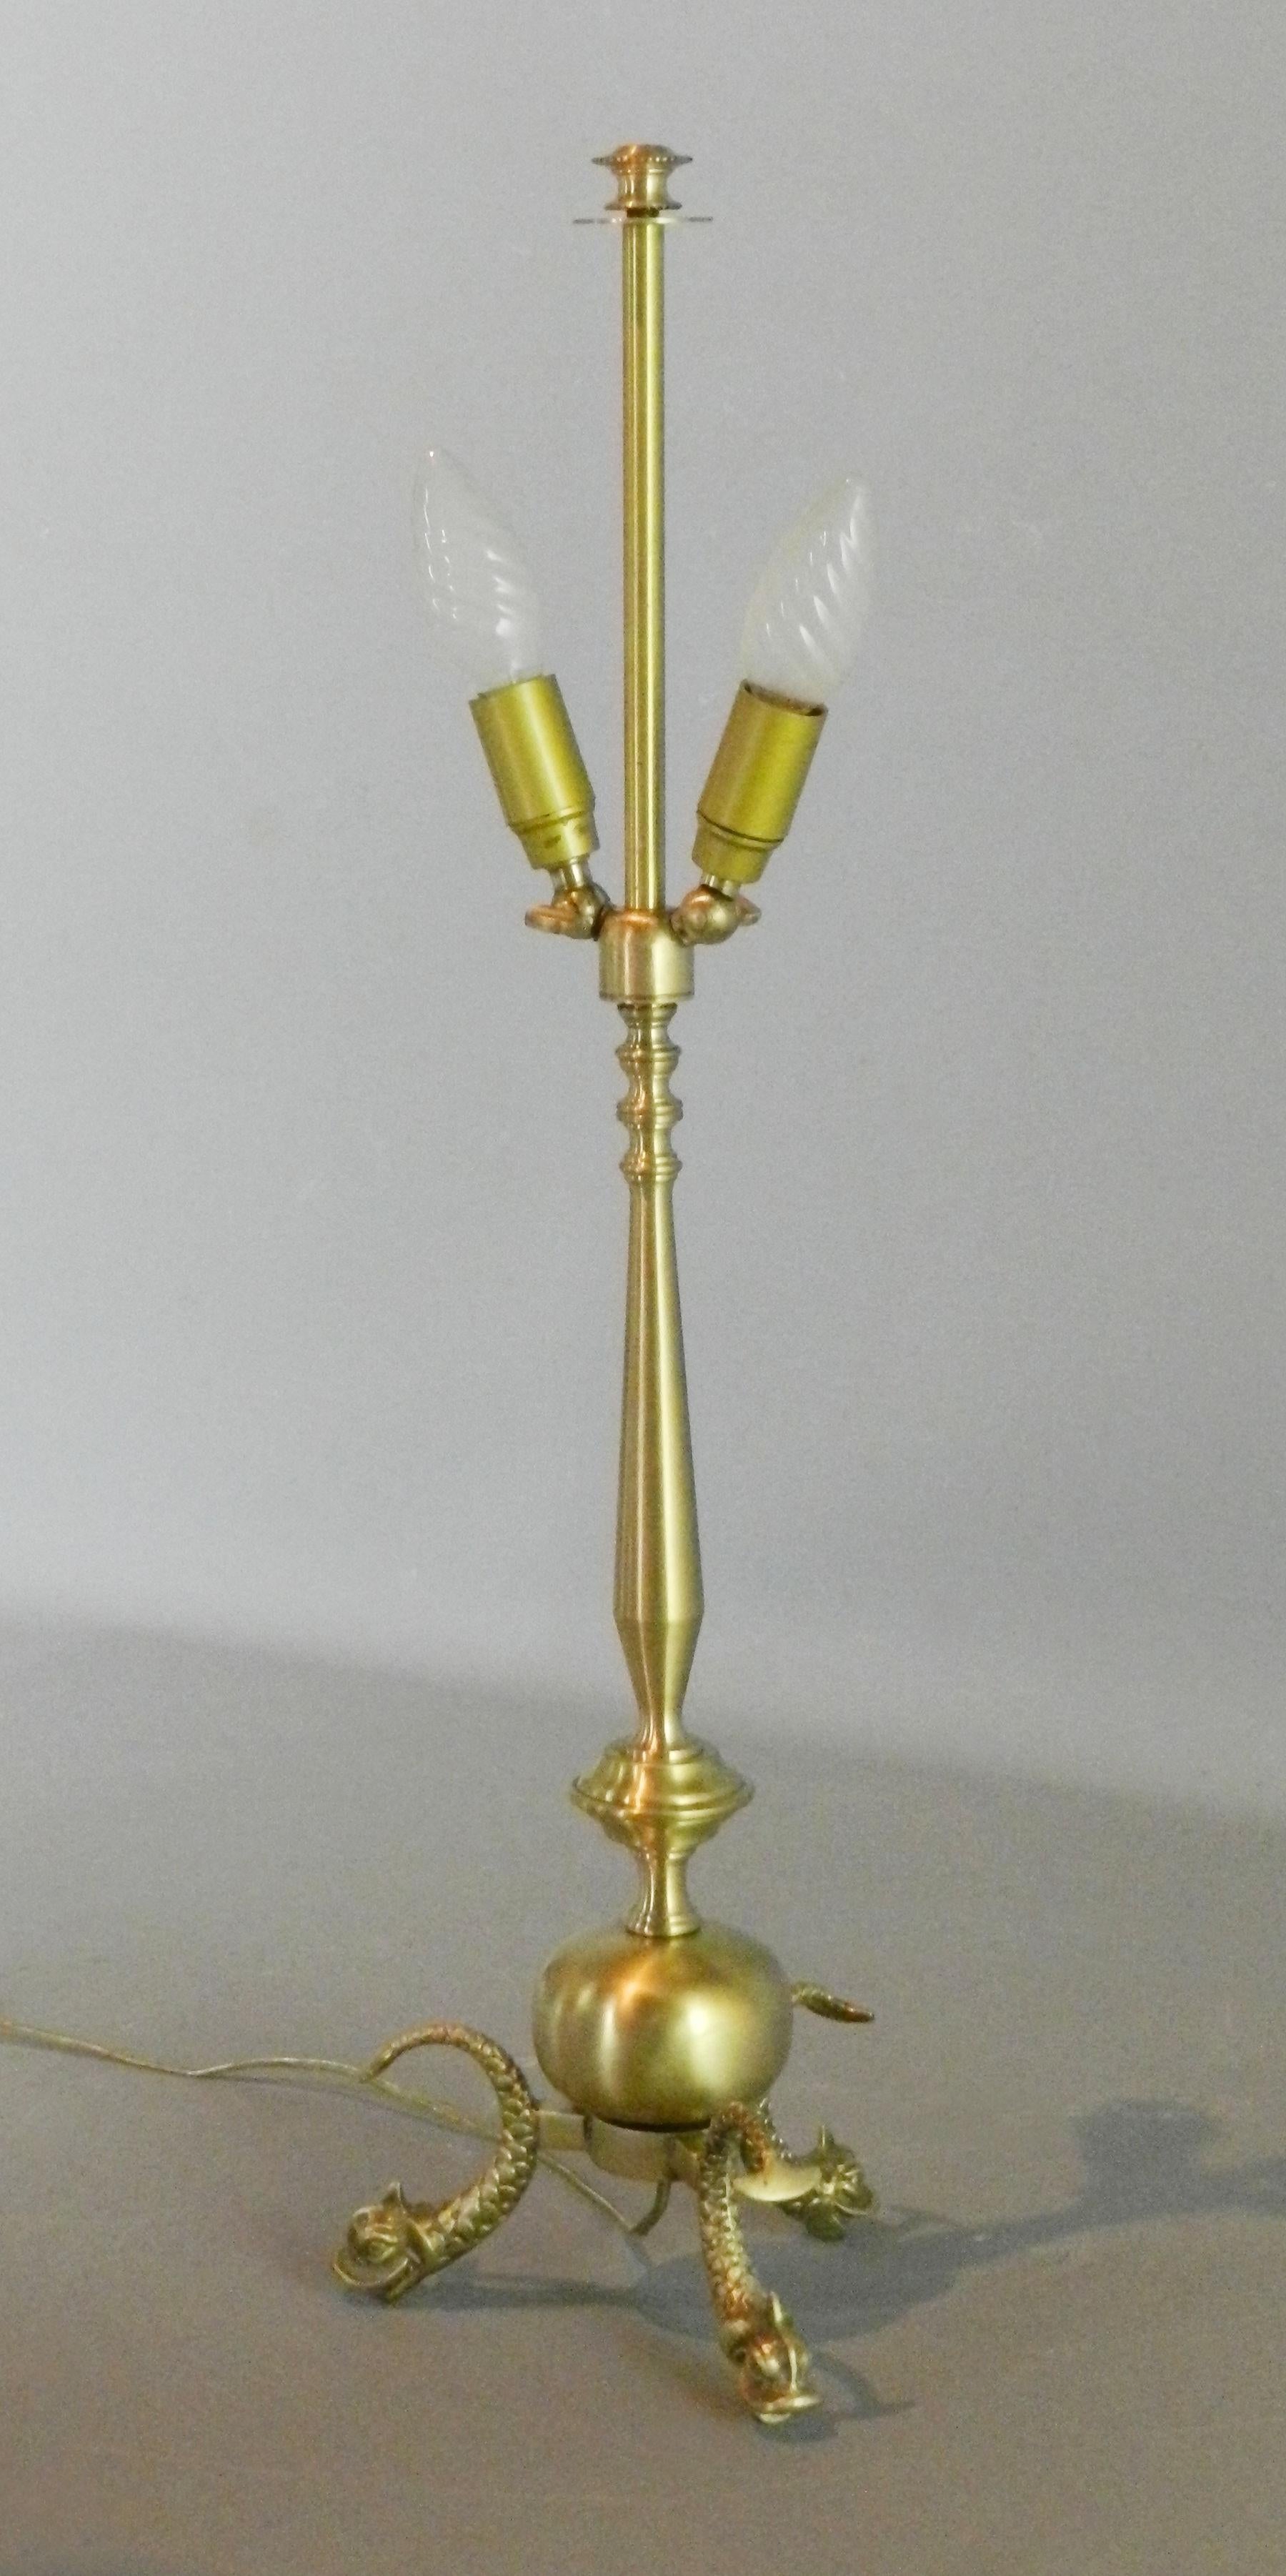 A distinctive French brass table lamp with Serpent Feet of good proportions depicting three serpents as feet attached to a bulbous central stem leading up to adjustable candle bulb light fittings.

The gold electric cable is fitted with an in-line